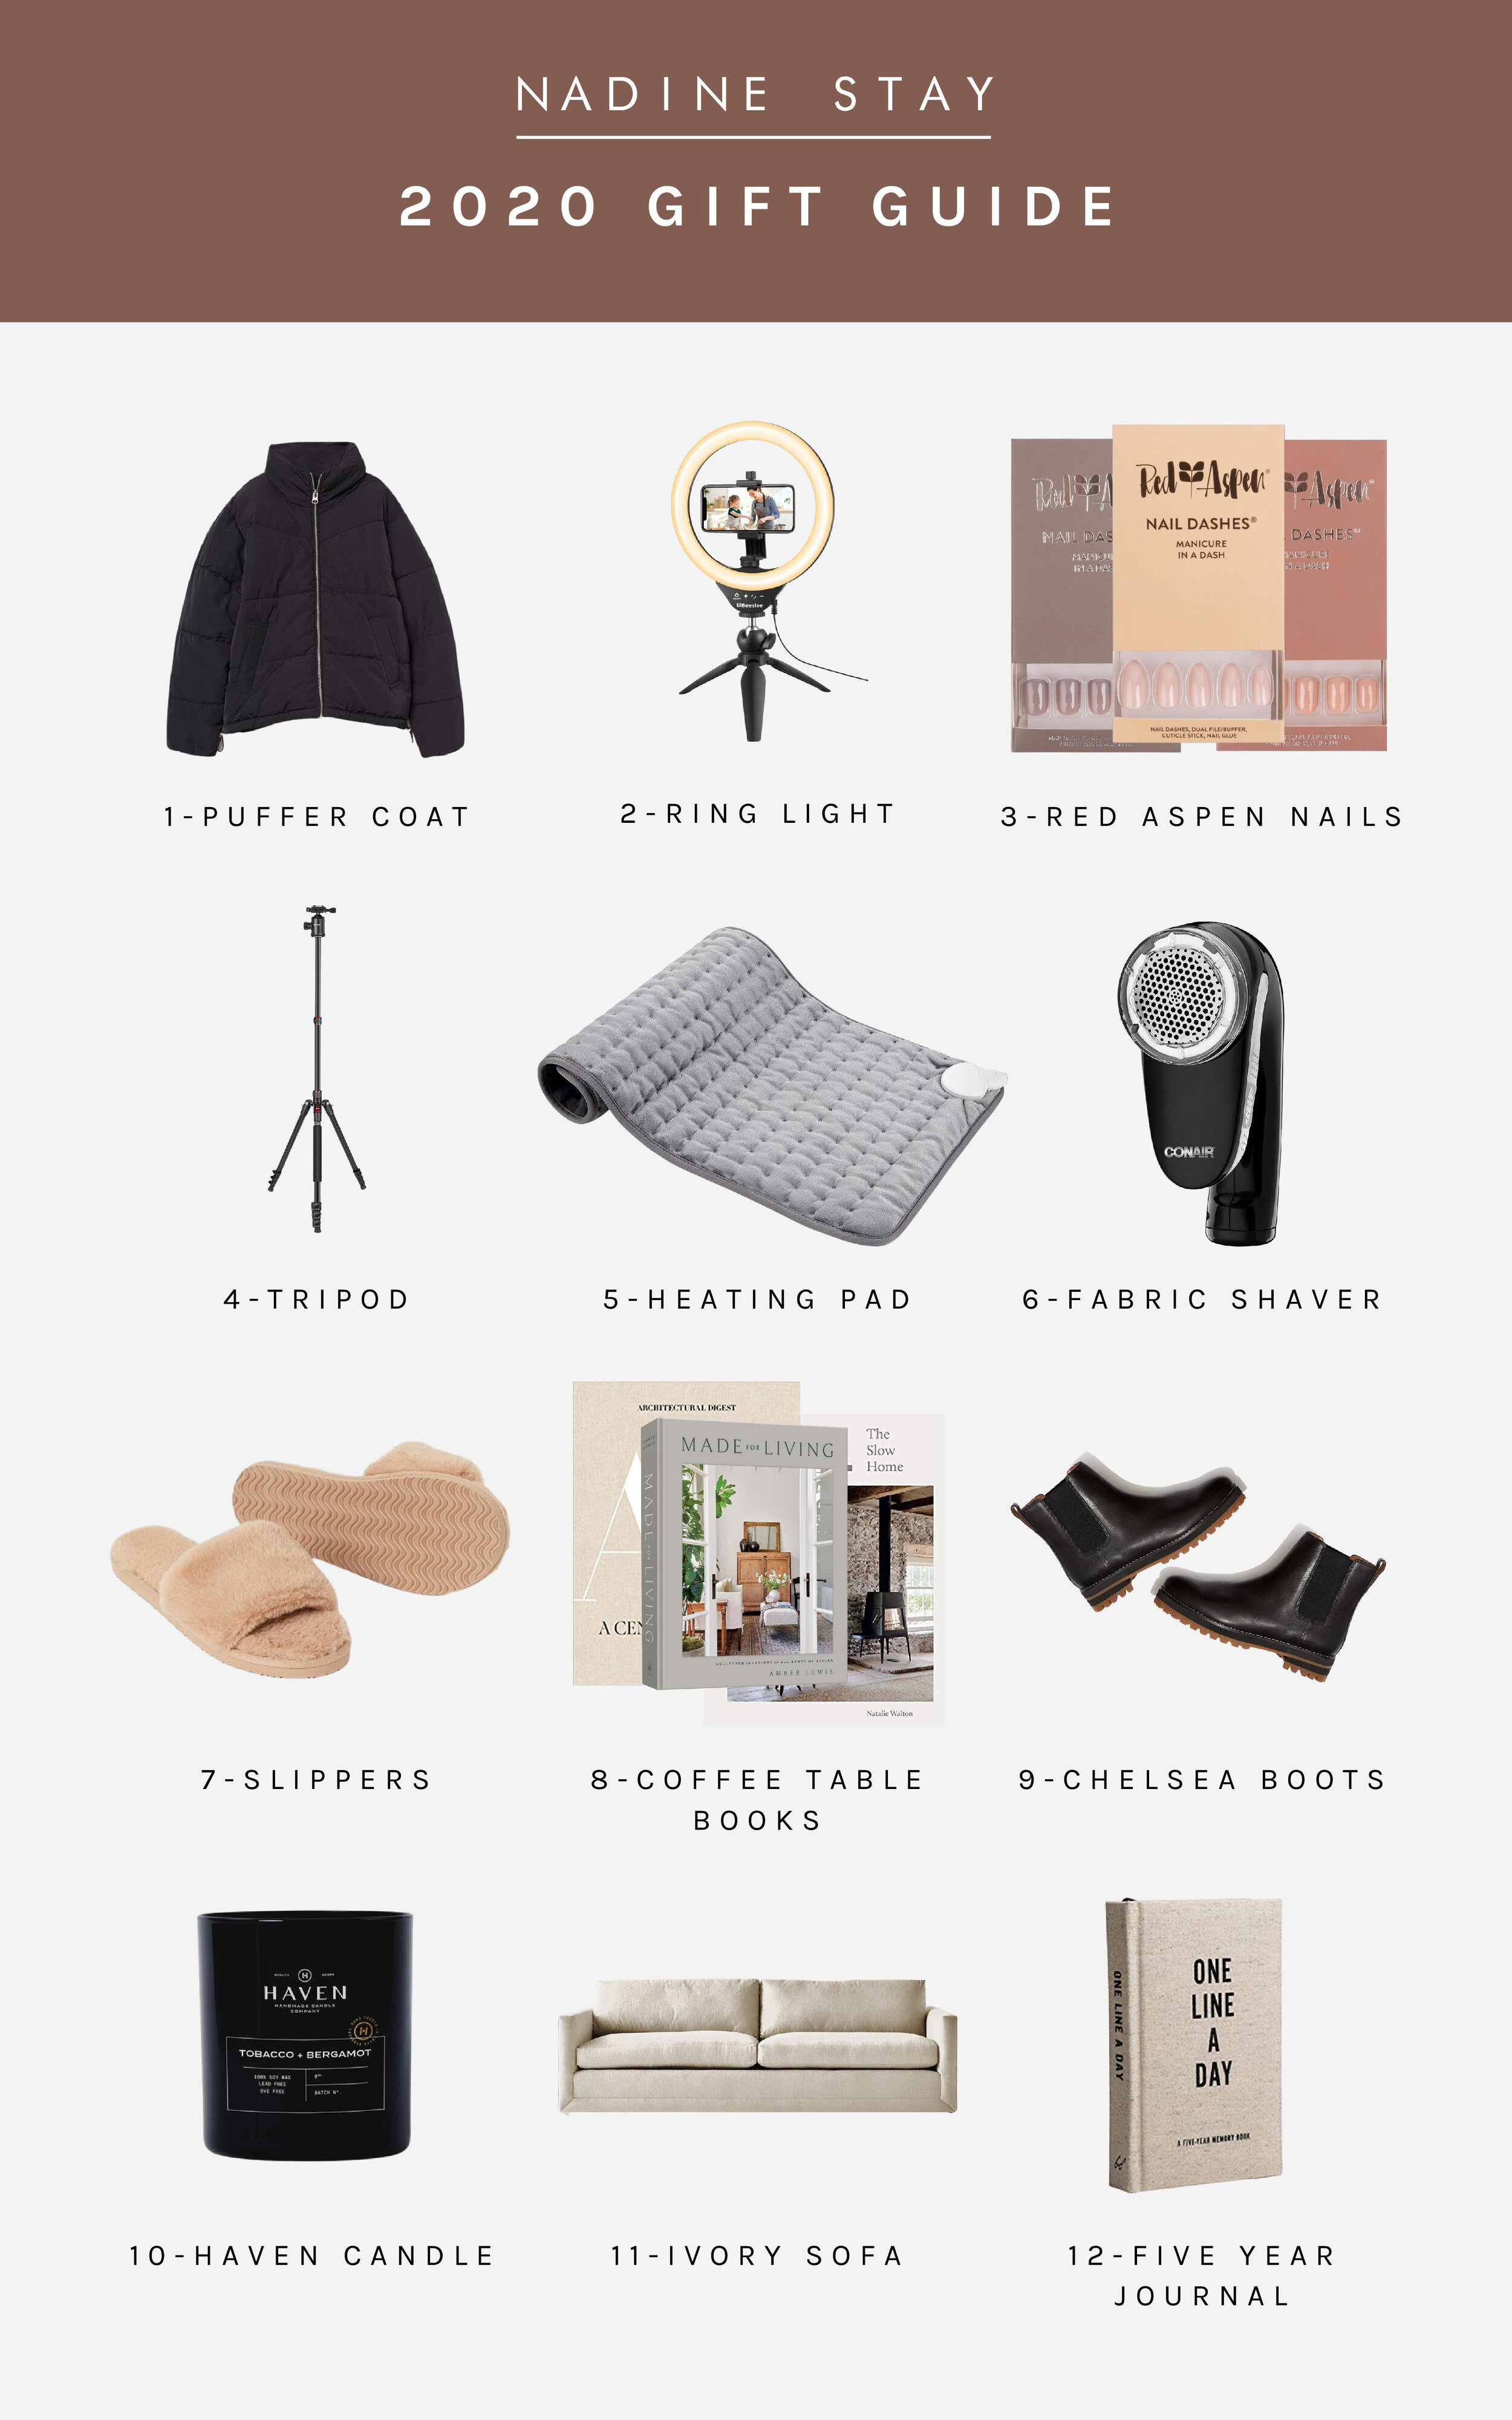 2020 Gift Guide (The Things I'm Wishing For This Christmas) - Nadine Stay | Black puffer coat, a ring light, press on nails, camera tripod, heating pad, fabric shaver, slippers, coffee table books, chelsea boots, haven candle co, ivory sofa from Mai…